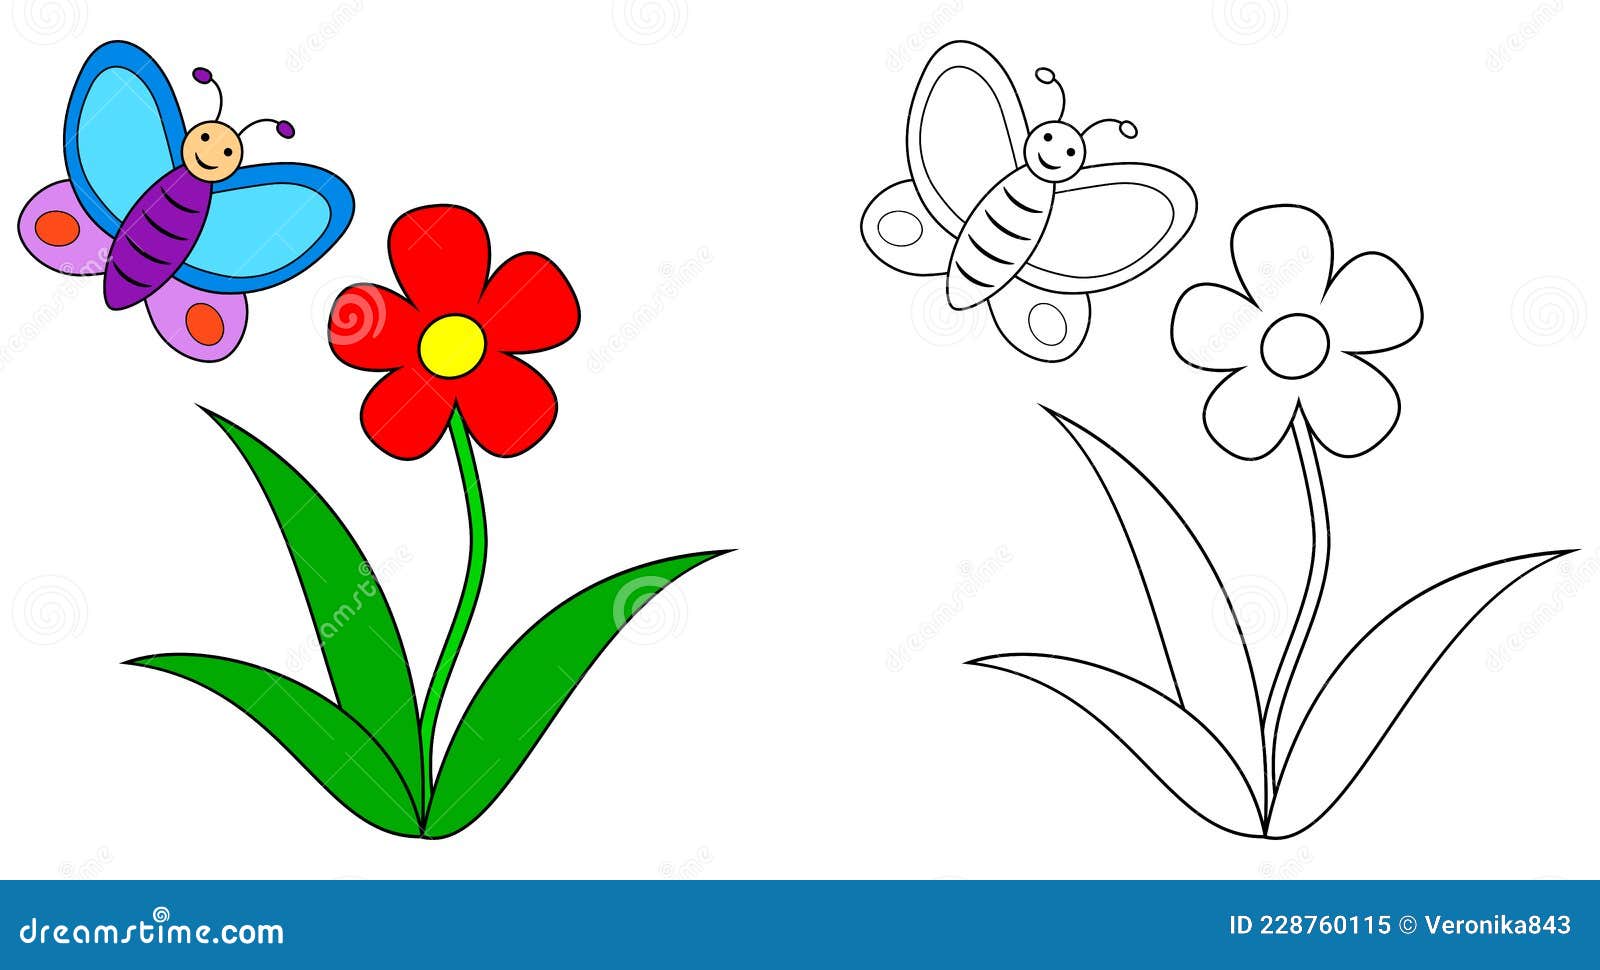 Cartoon Butterfly with Flower Colorful and Black and White. Coloring Book  Page for Children Stock Vector - Illustration of adults, grow: 228760115